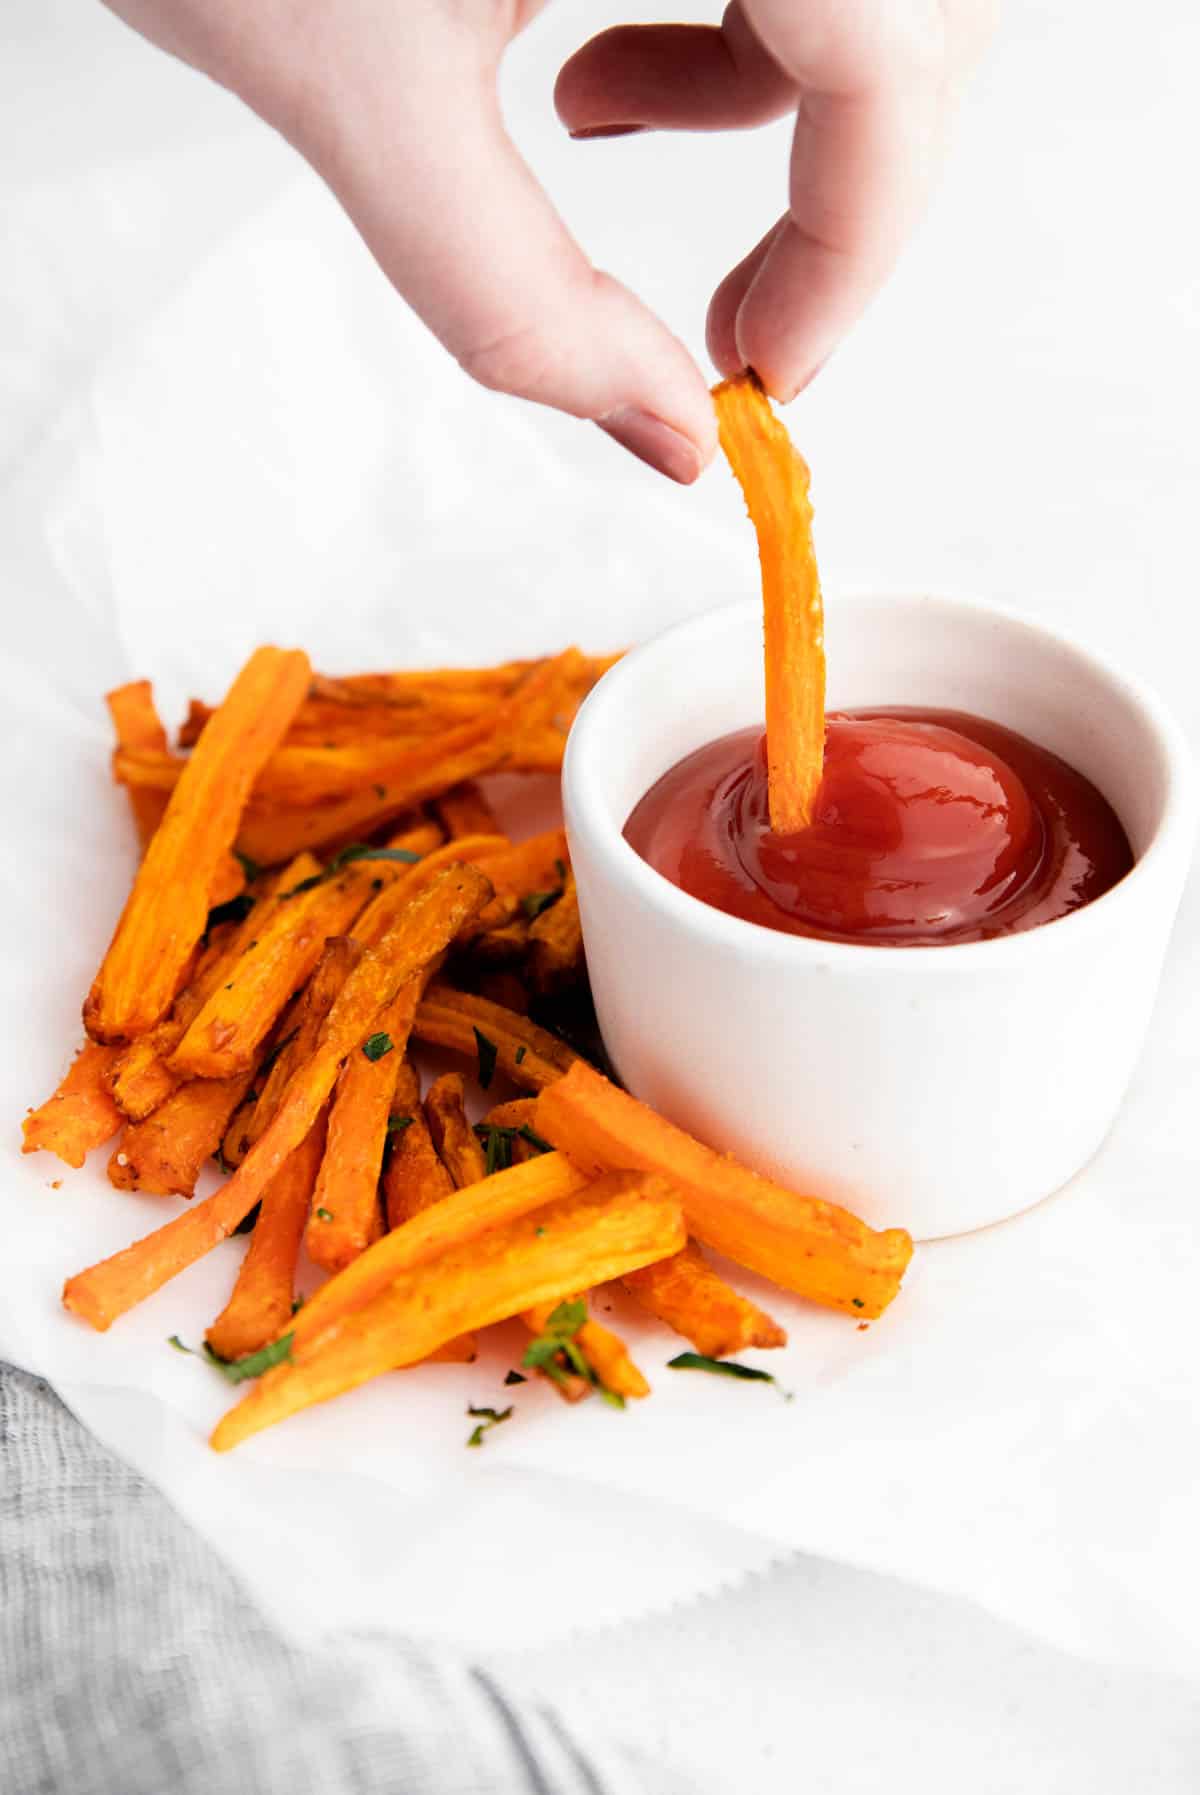 dipping a carrot fry into ketchup